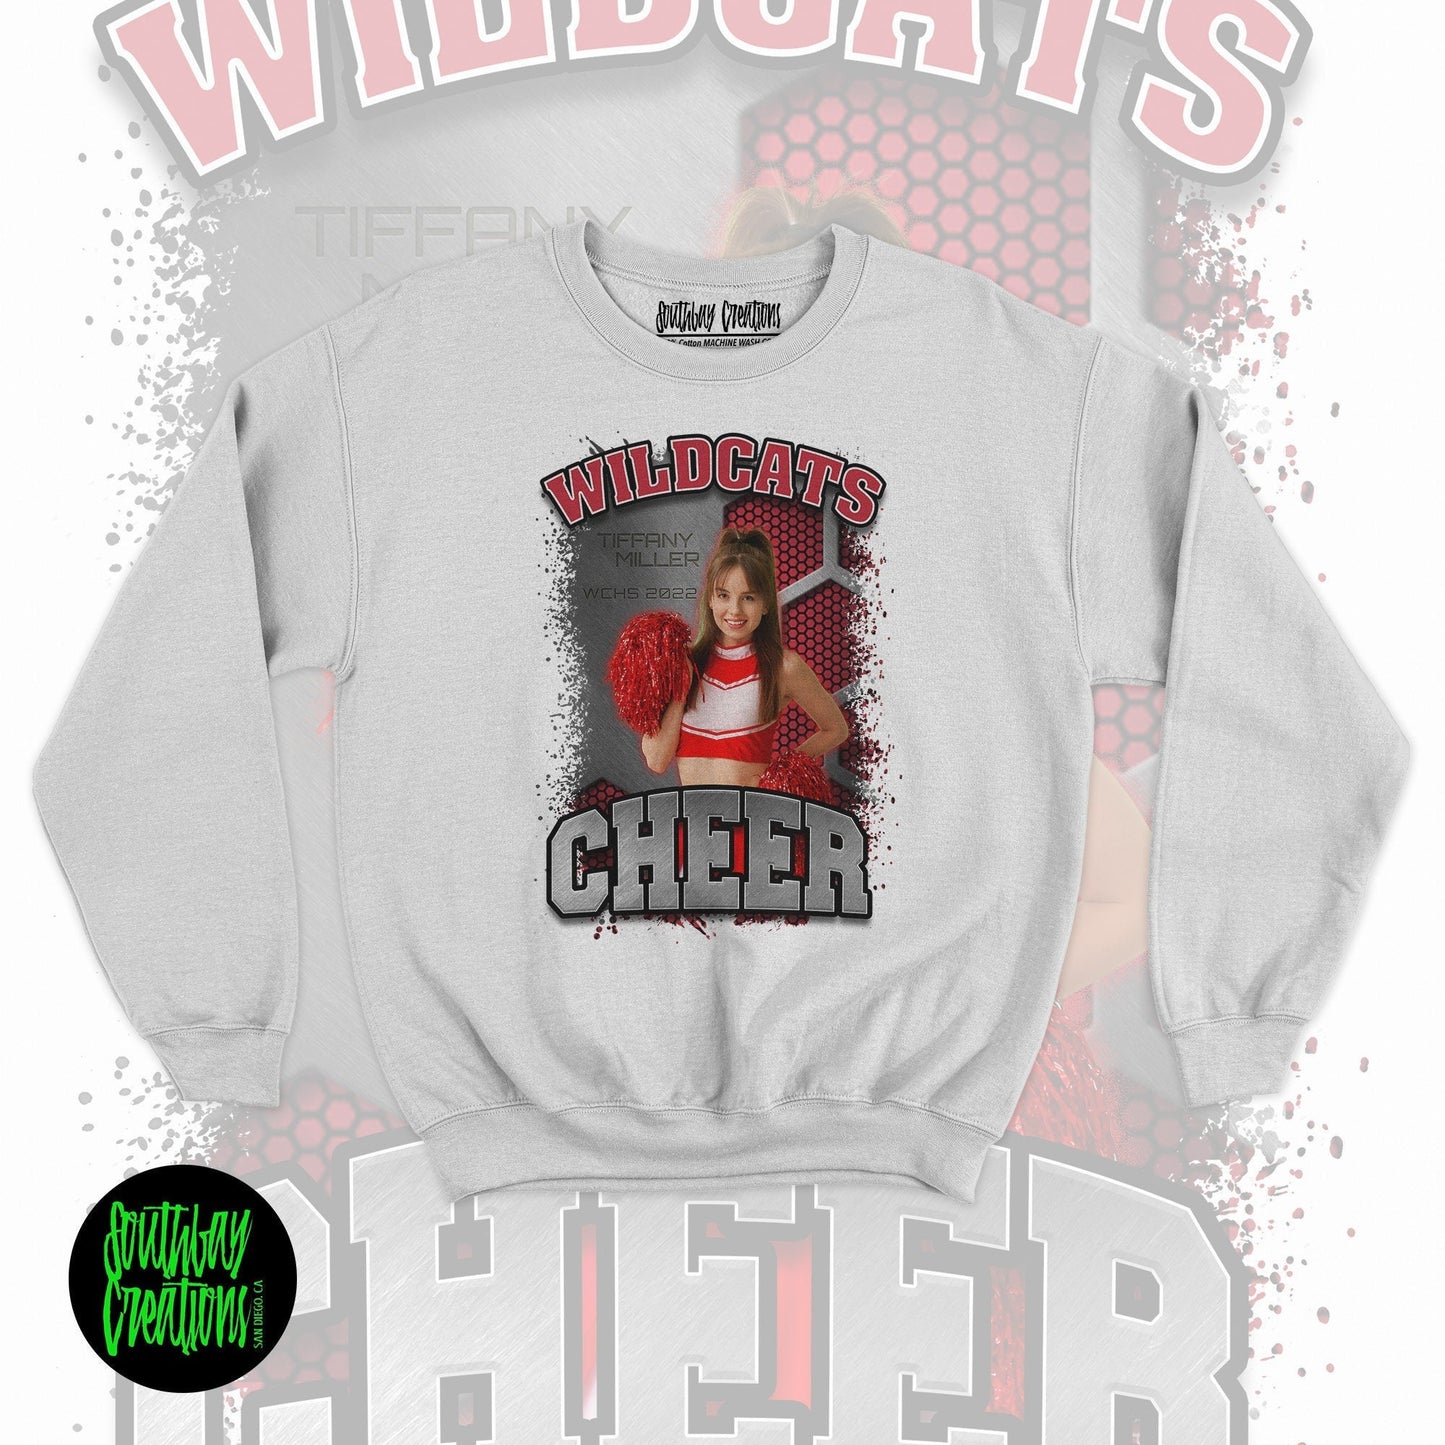 Custom Cheerleader Photo T-Shirt - Personalized for Family & Fans - Senior Night or Game Day - XS to 5XL Sizes Available Cheer Mom Dance Mom